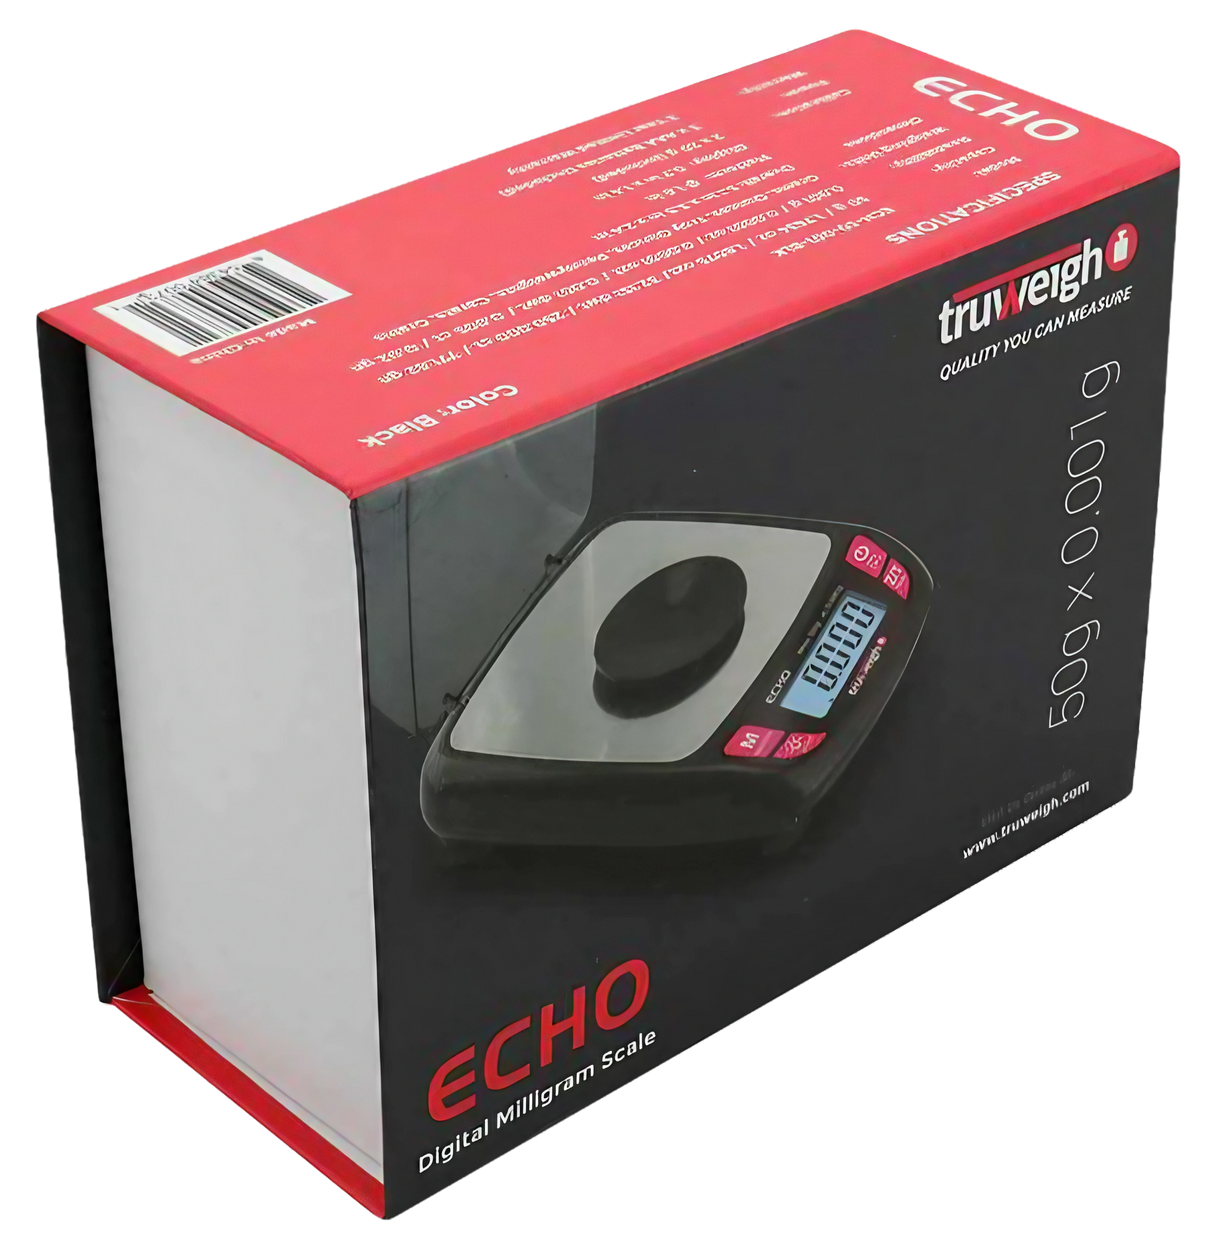 Truweigh Echo Digital Milligram Scale in black, precise 0.001g accuracy, ideal for kitchen and herbs